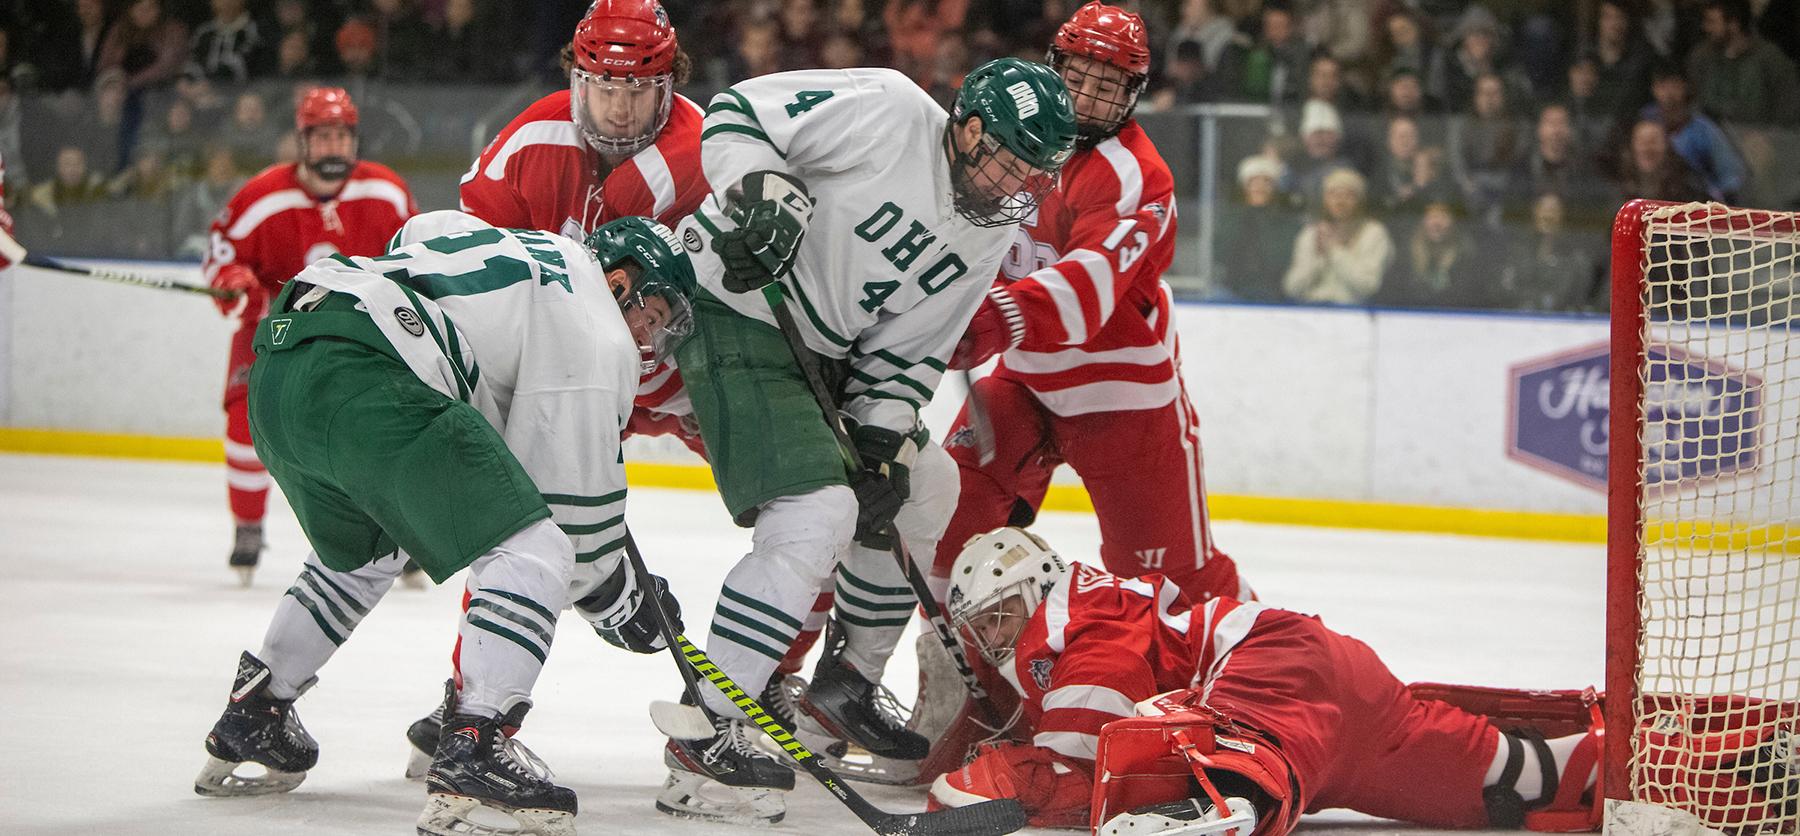 OHIO Hockey players during a game.